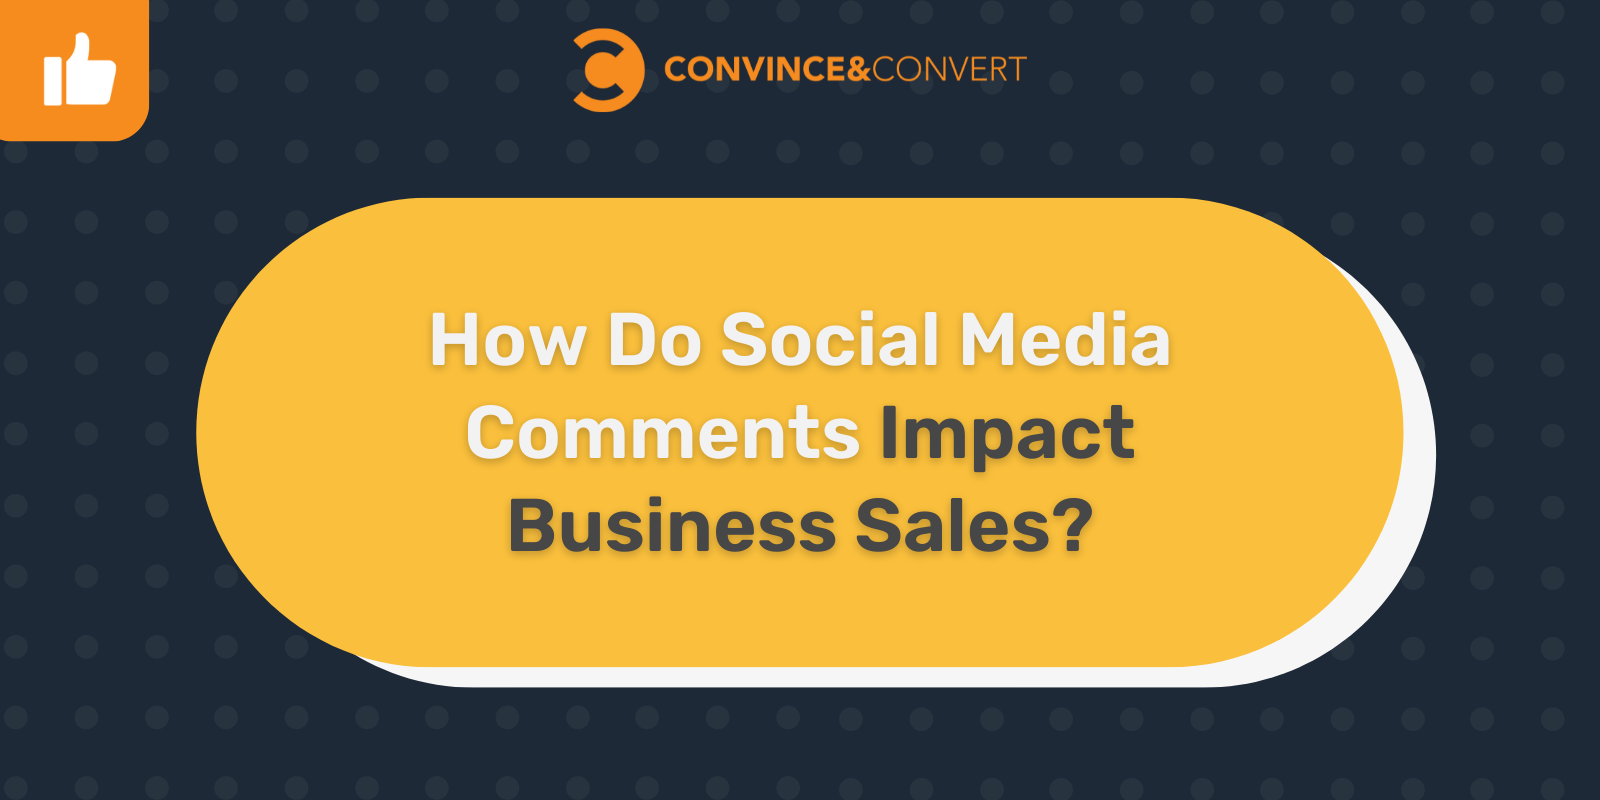 How Do Social Media Comments Impact Business Sales?